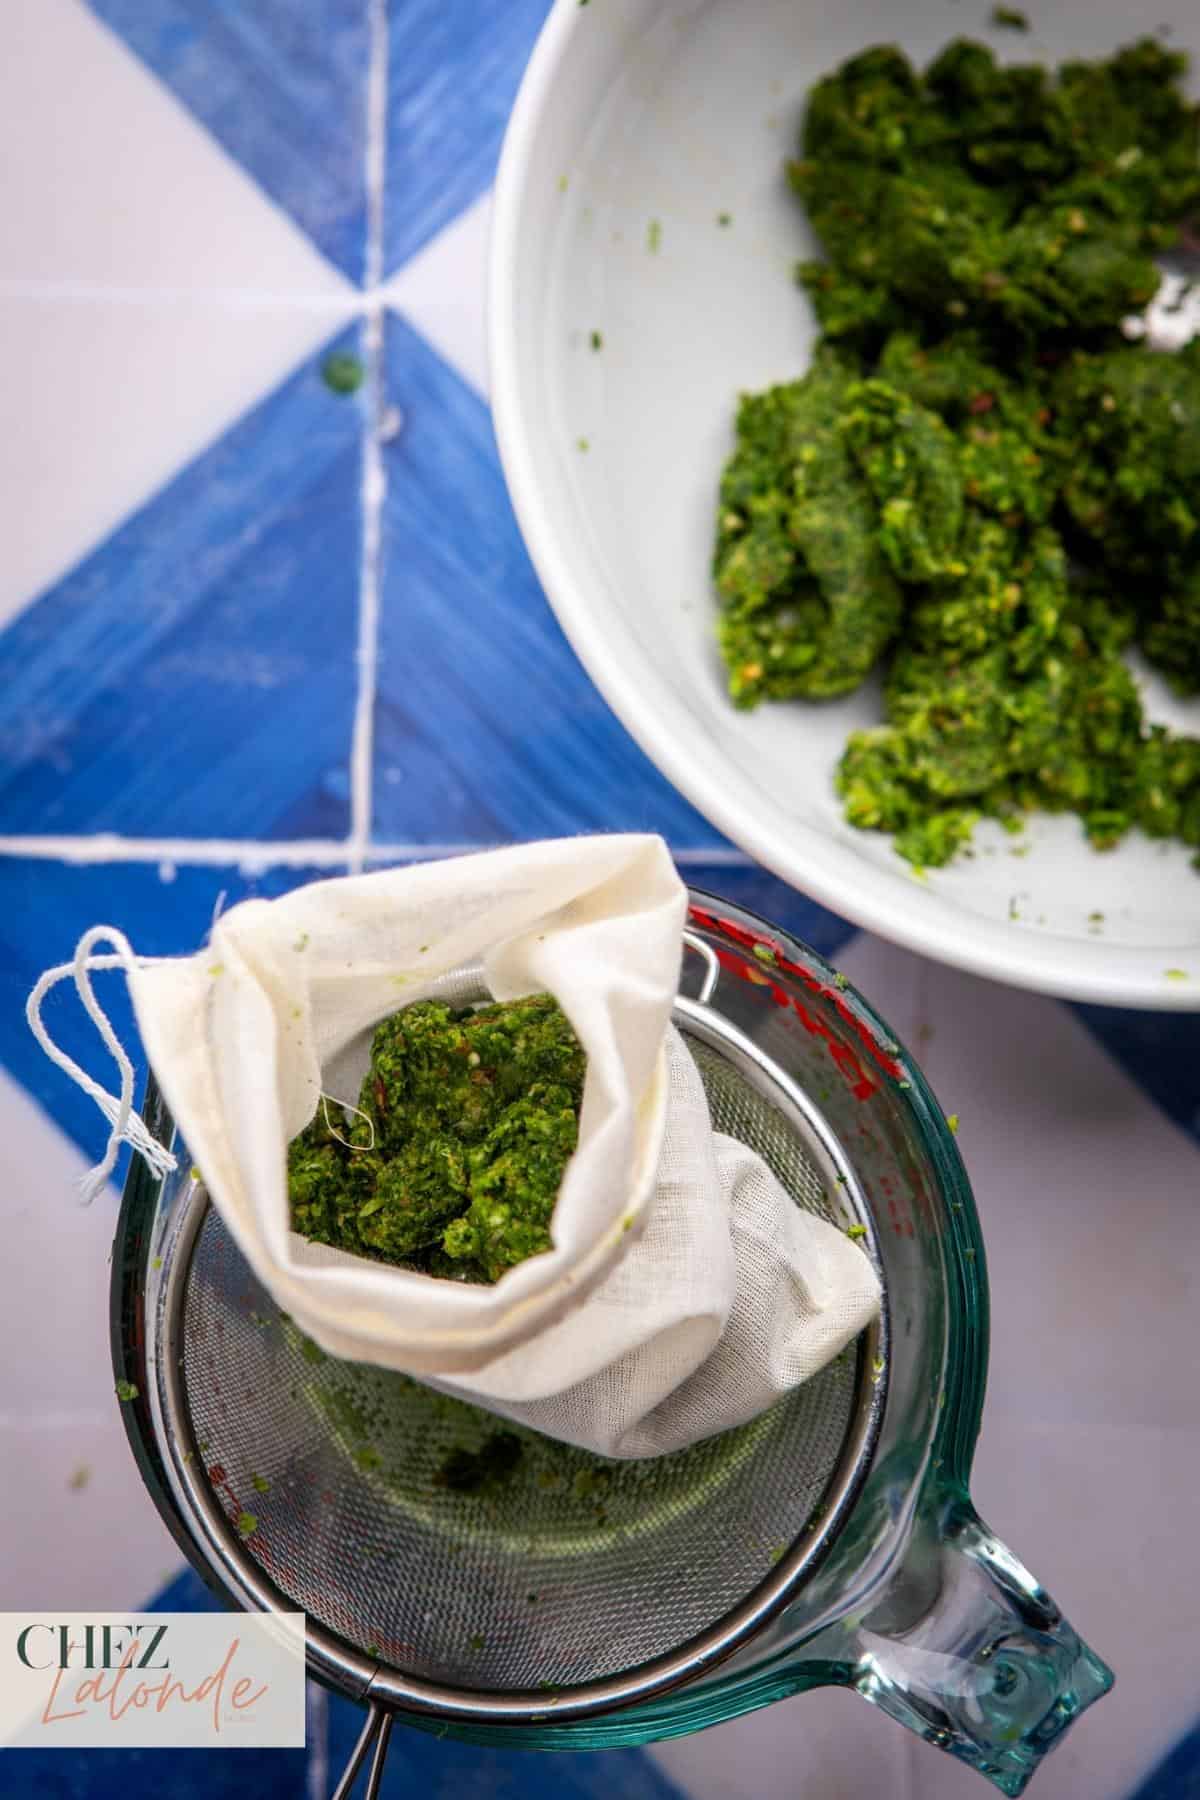 Move your herb and aromatic blend to a bowl. Take a few spoonfuls of the mixture and place it onto a cheesecloth.